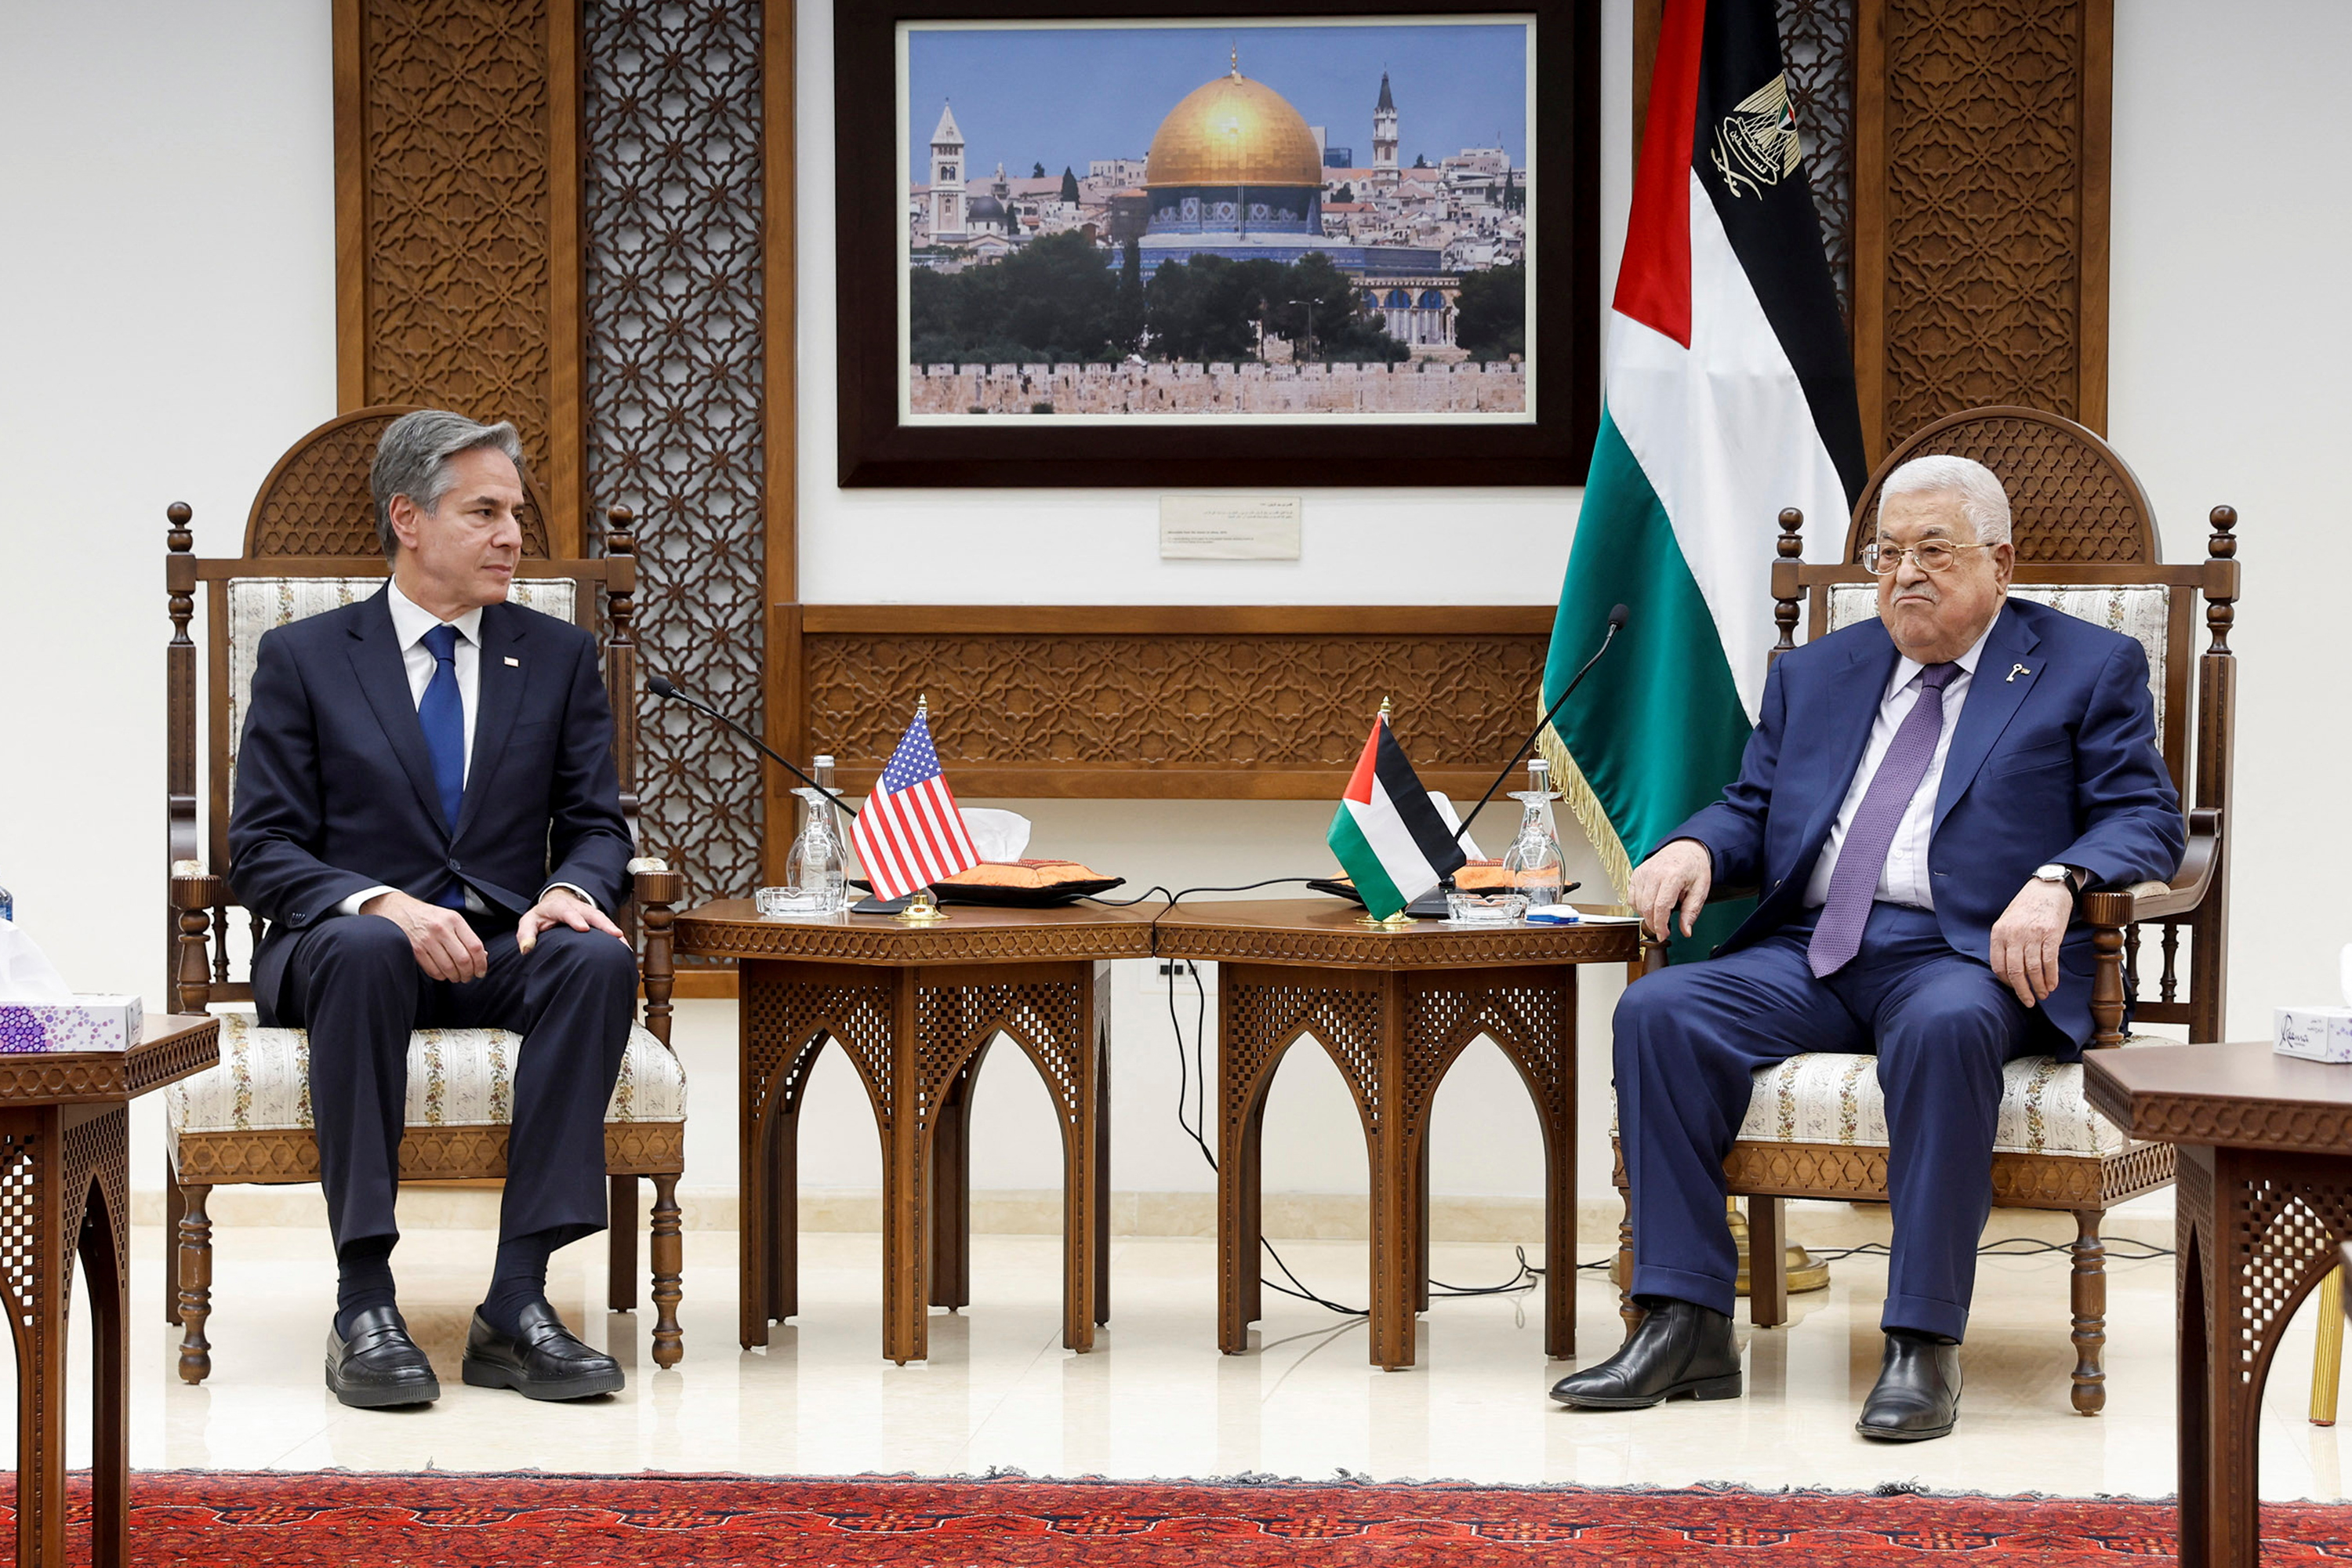 US Secretary of State Antony Blinken meets with Palestinian President Mahmoud Abbas in the West Bank on November 5.